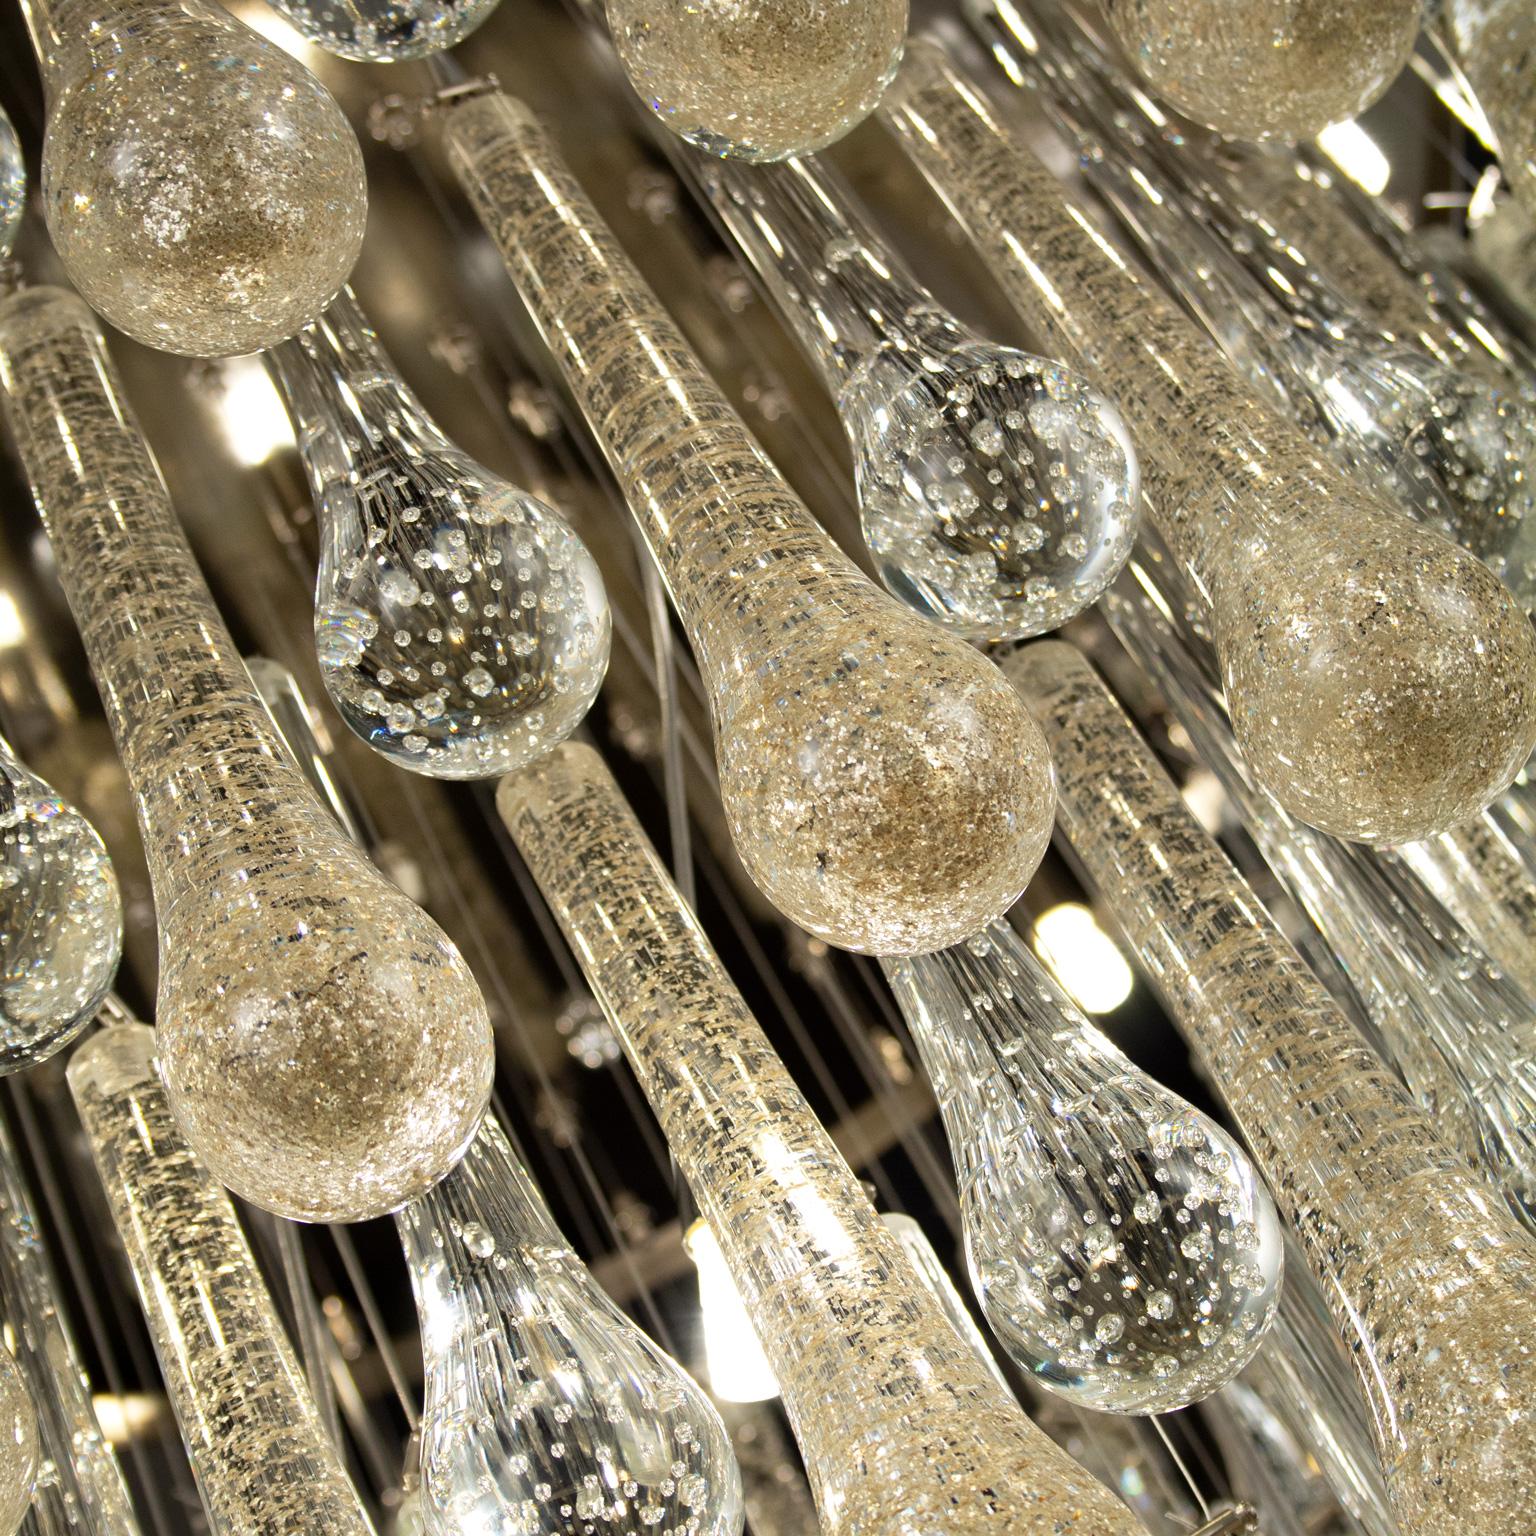 Other 21st Century Chandelier Drop-Shaped Elements Gold and Silver Glass by Multiforme For Sale